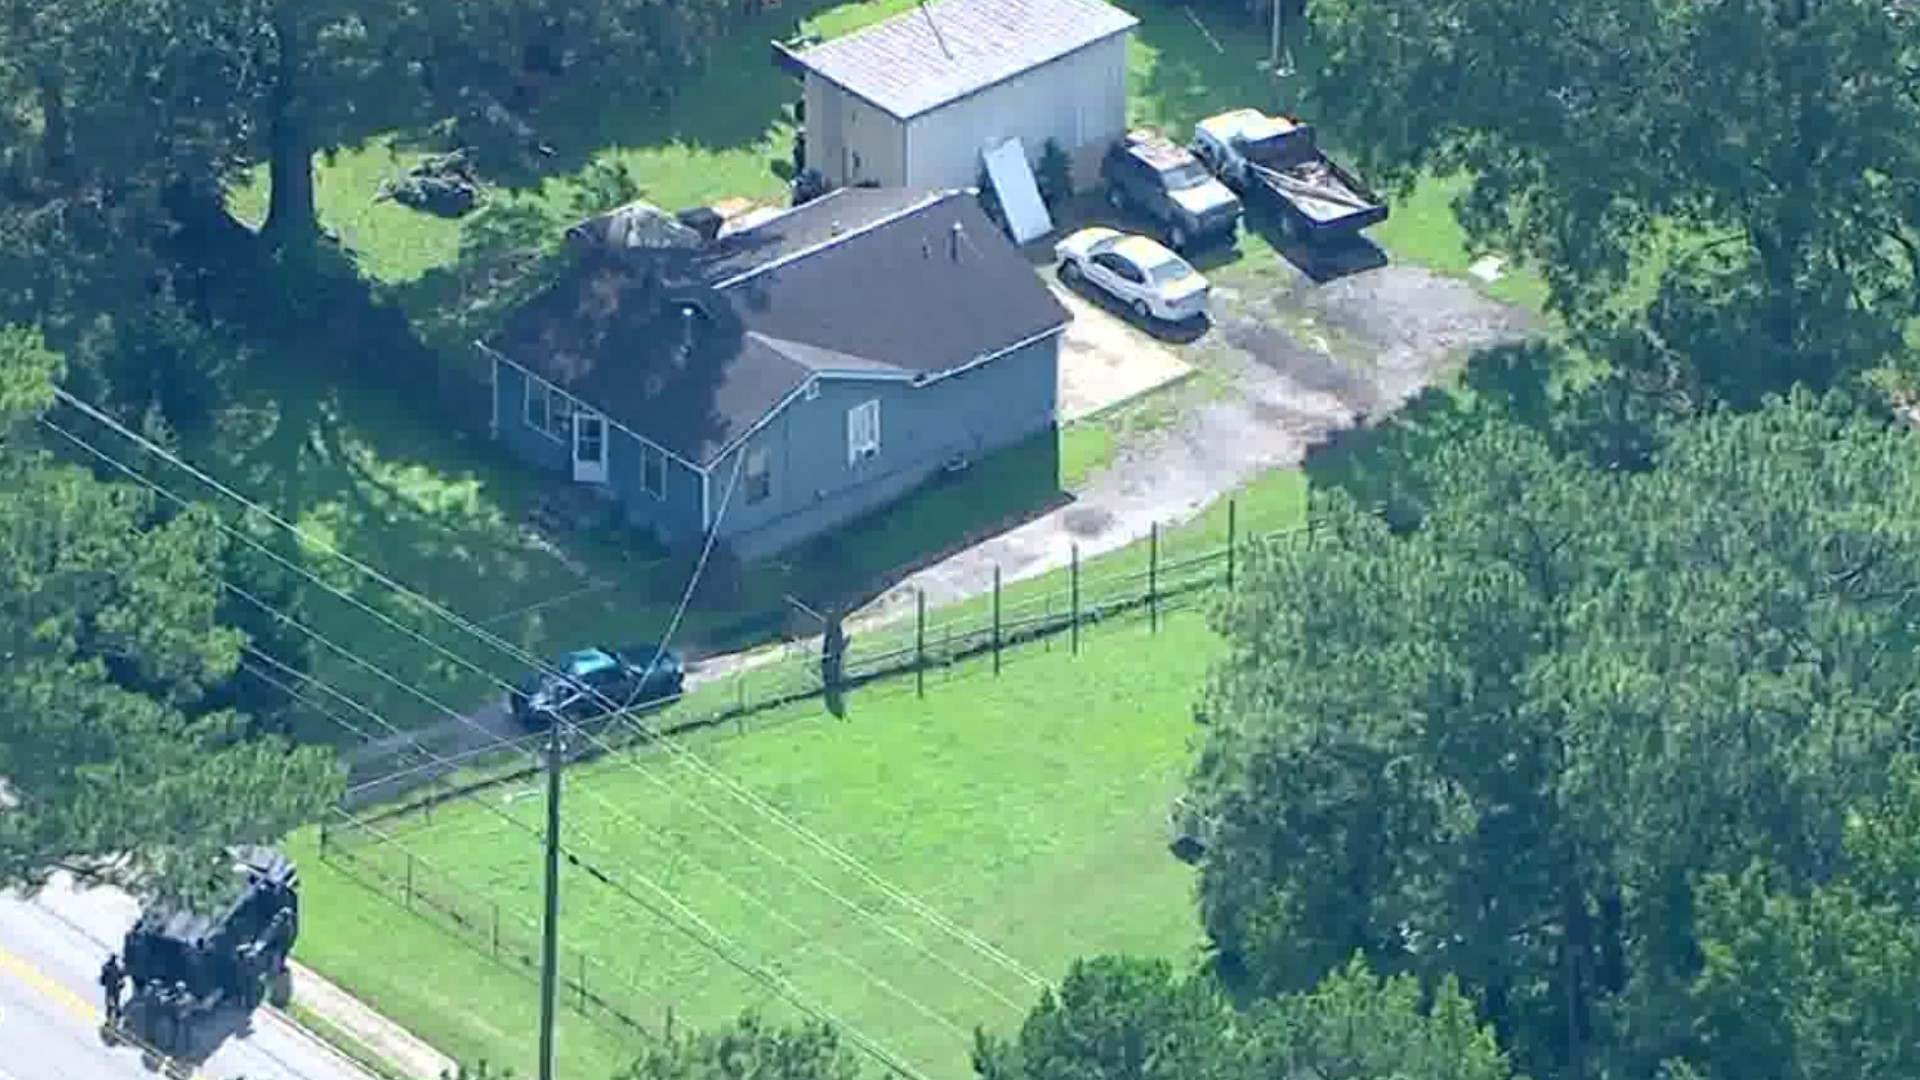 11Alive SkyTracker flew over a home at the 500 block of Allgood Road in Stone Mountain Monday afternoon.